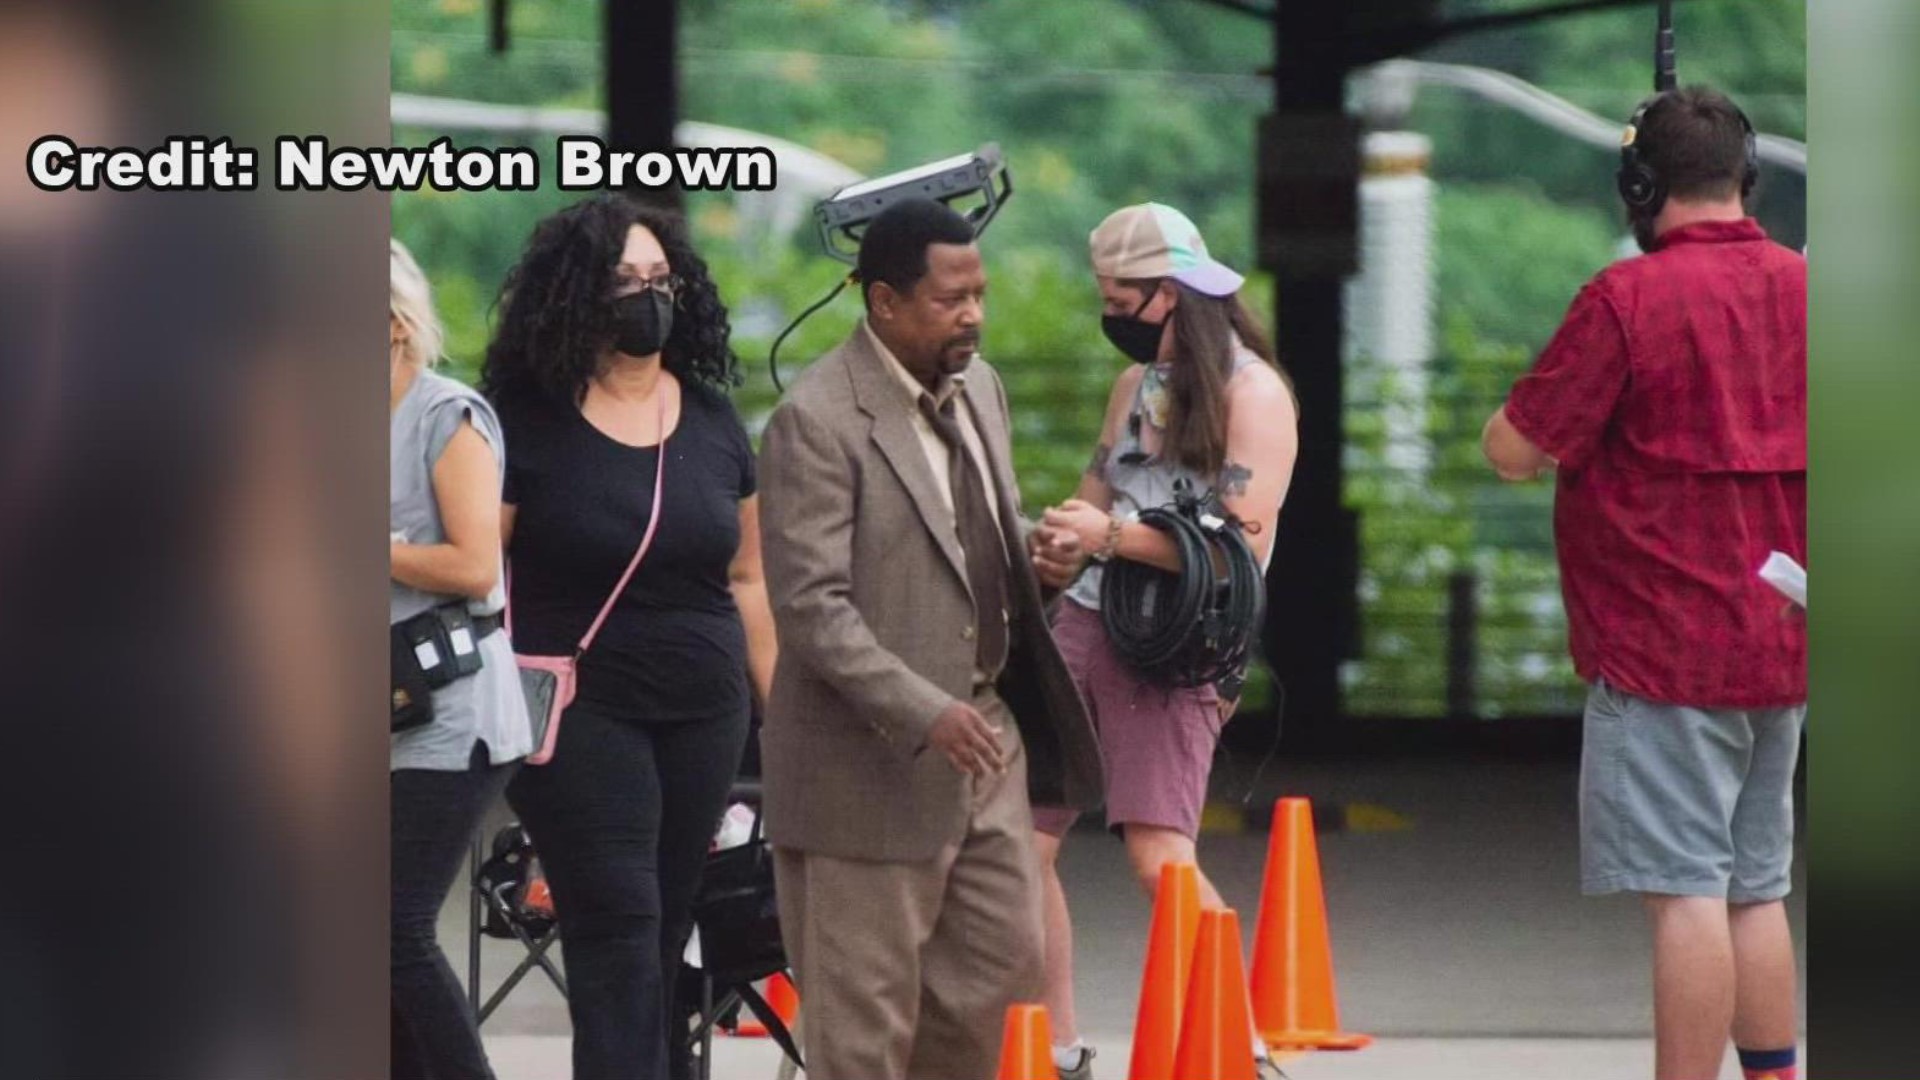 Hollywood star Martin Lawrence has been spotted in Northwest Arkansas filming a movie.